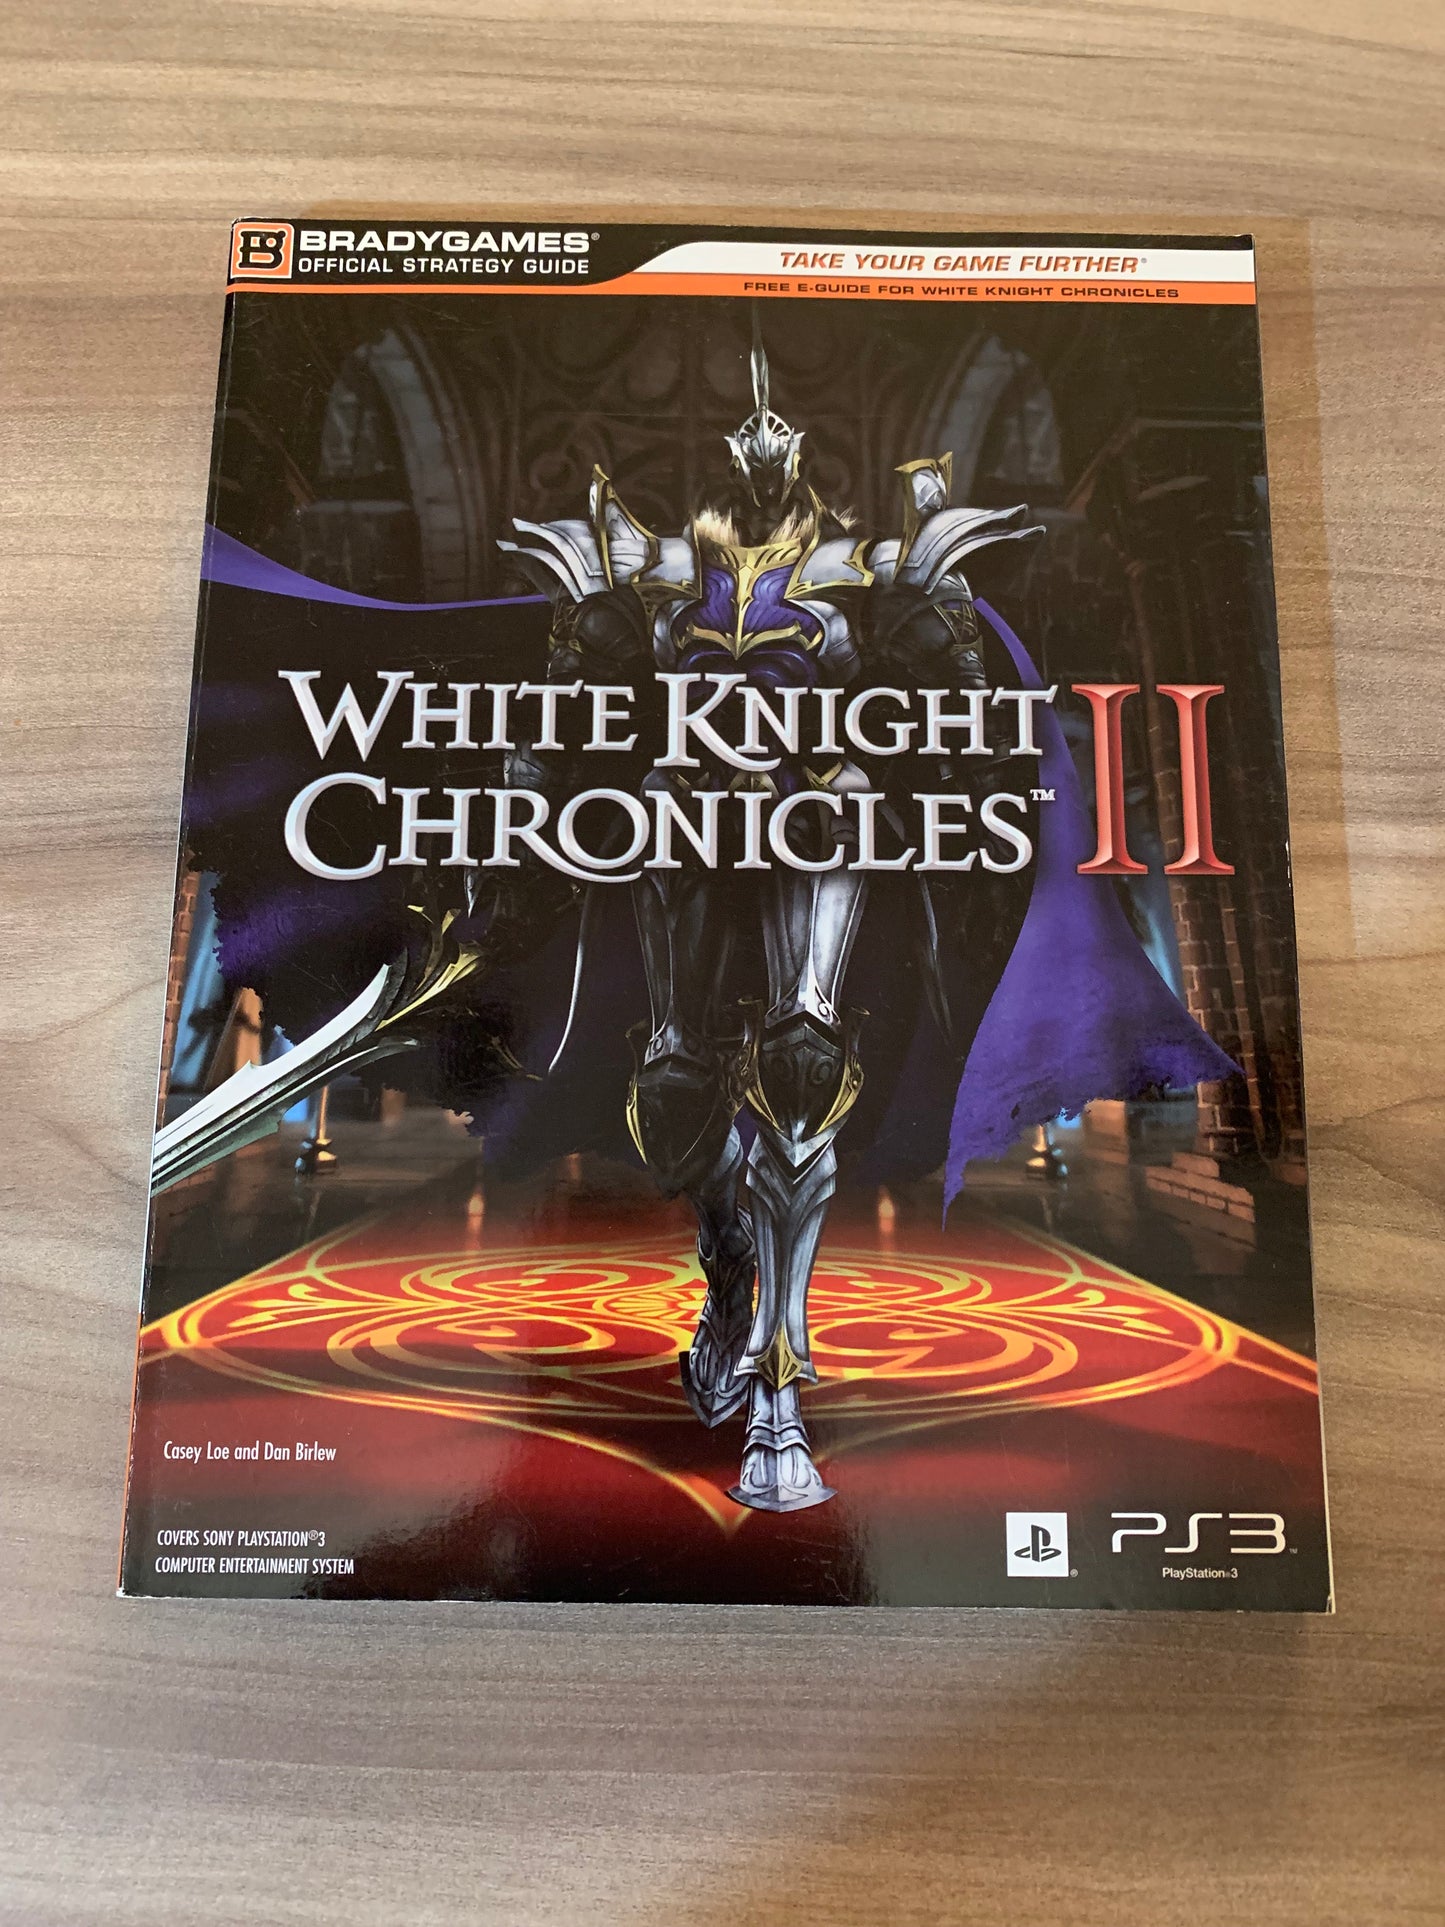 PiXEL-RETRO.COM : BRADYGAMES BOOKS STRATEGY PLAYER'S GUIDE WALKTHROUGH OFFICIAL WHITE KNIGHT CHRONICLES II